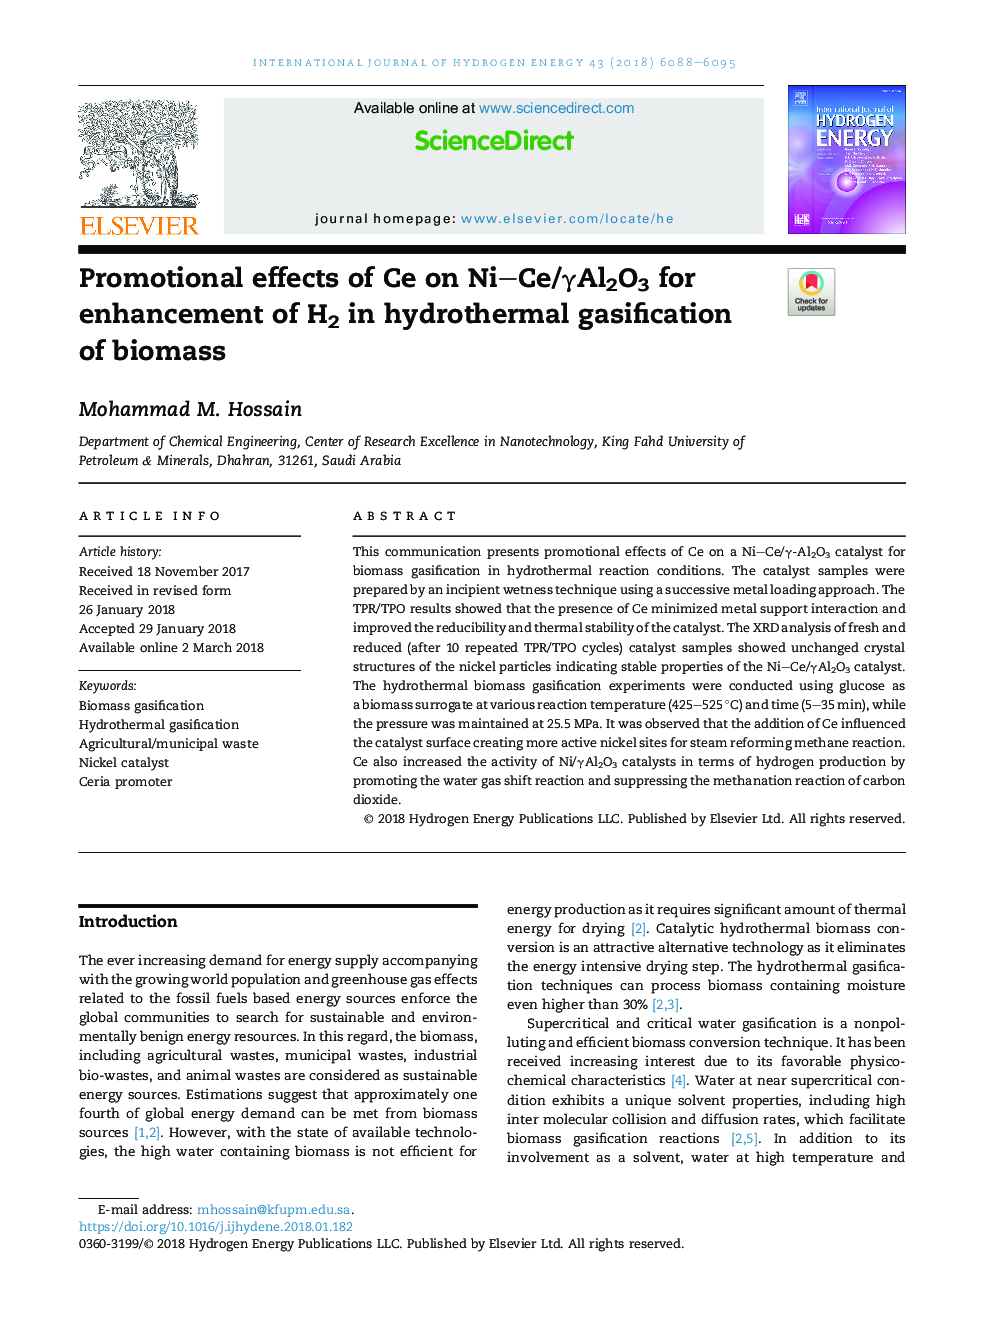 Promotional effects of Ce on NiCe/Î³Al2O3 for enhancement of H2 in hydrothermal gasification ofÂ biomass